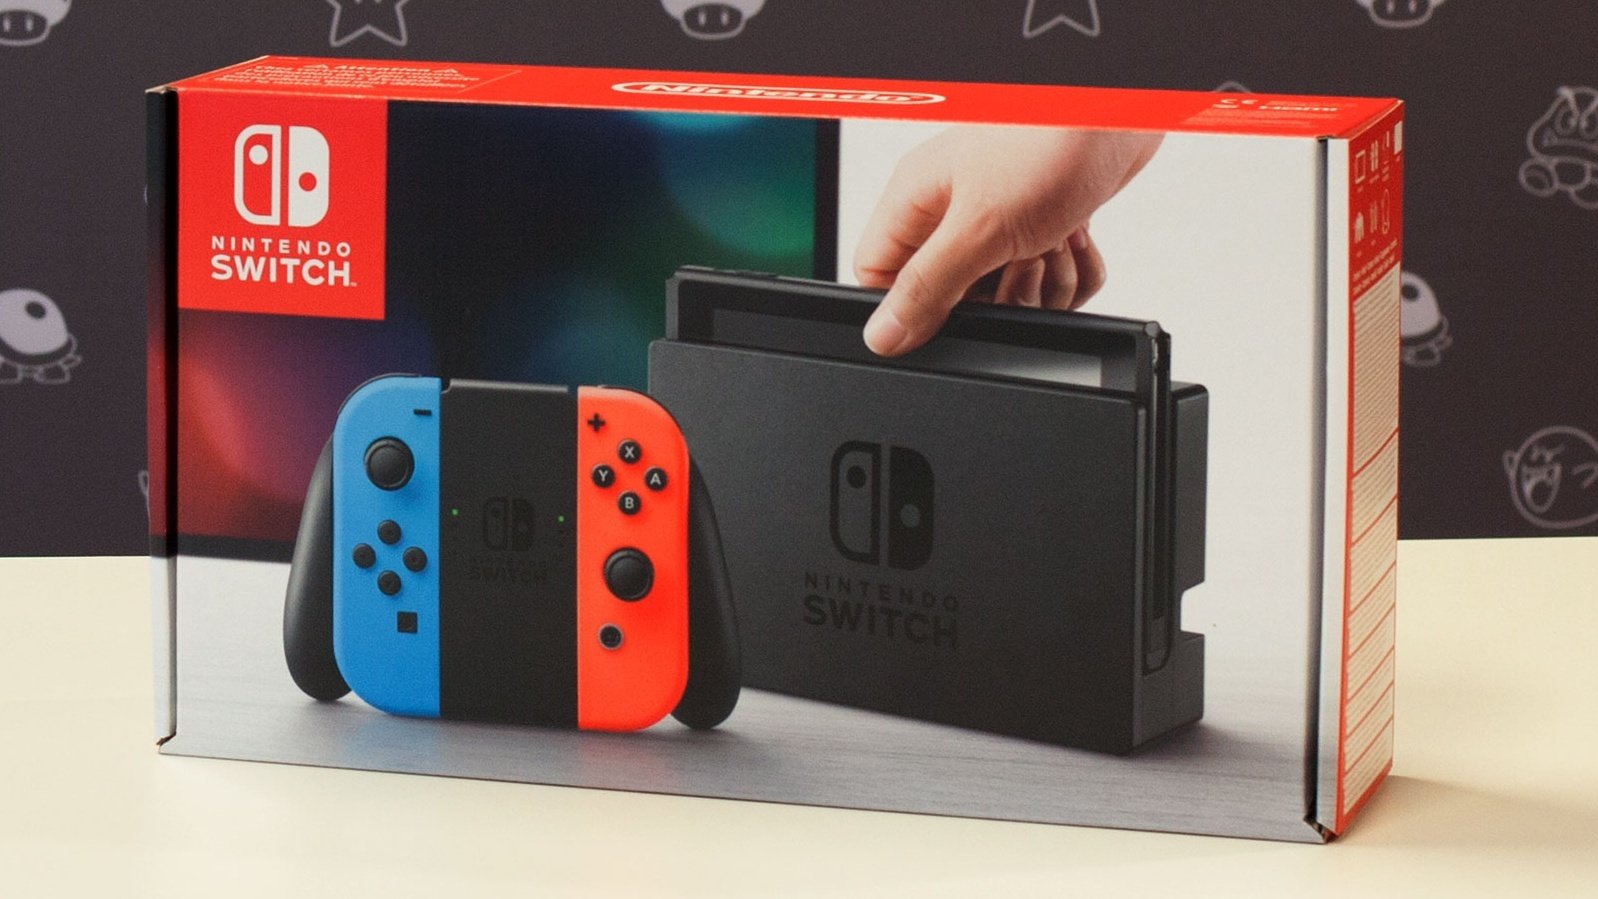 Nintendo Switch sales have sailed past N64 lifetime shipments